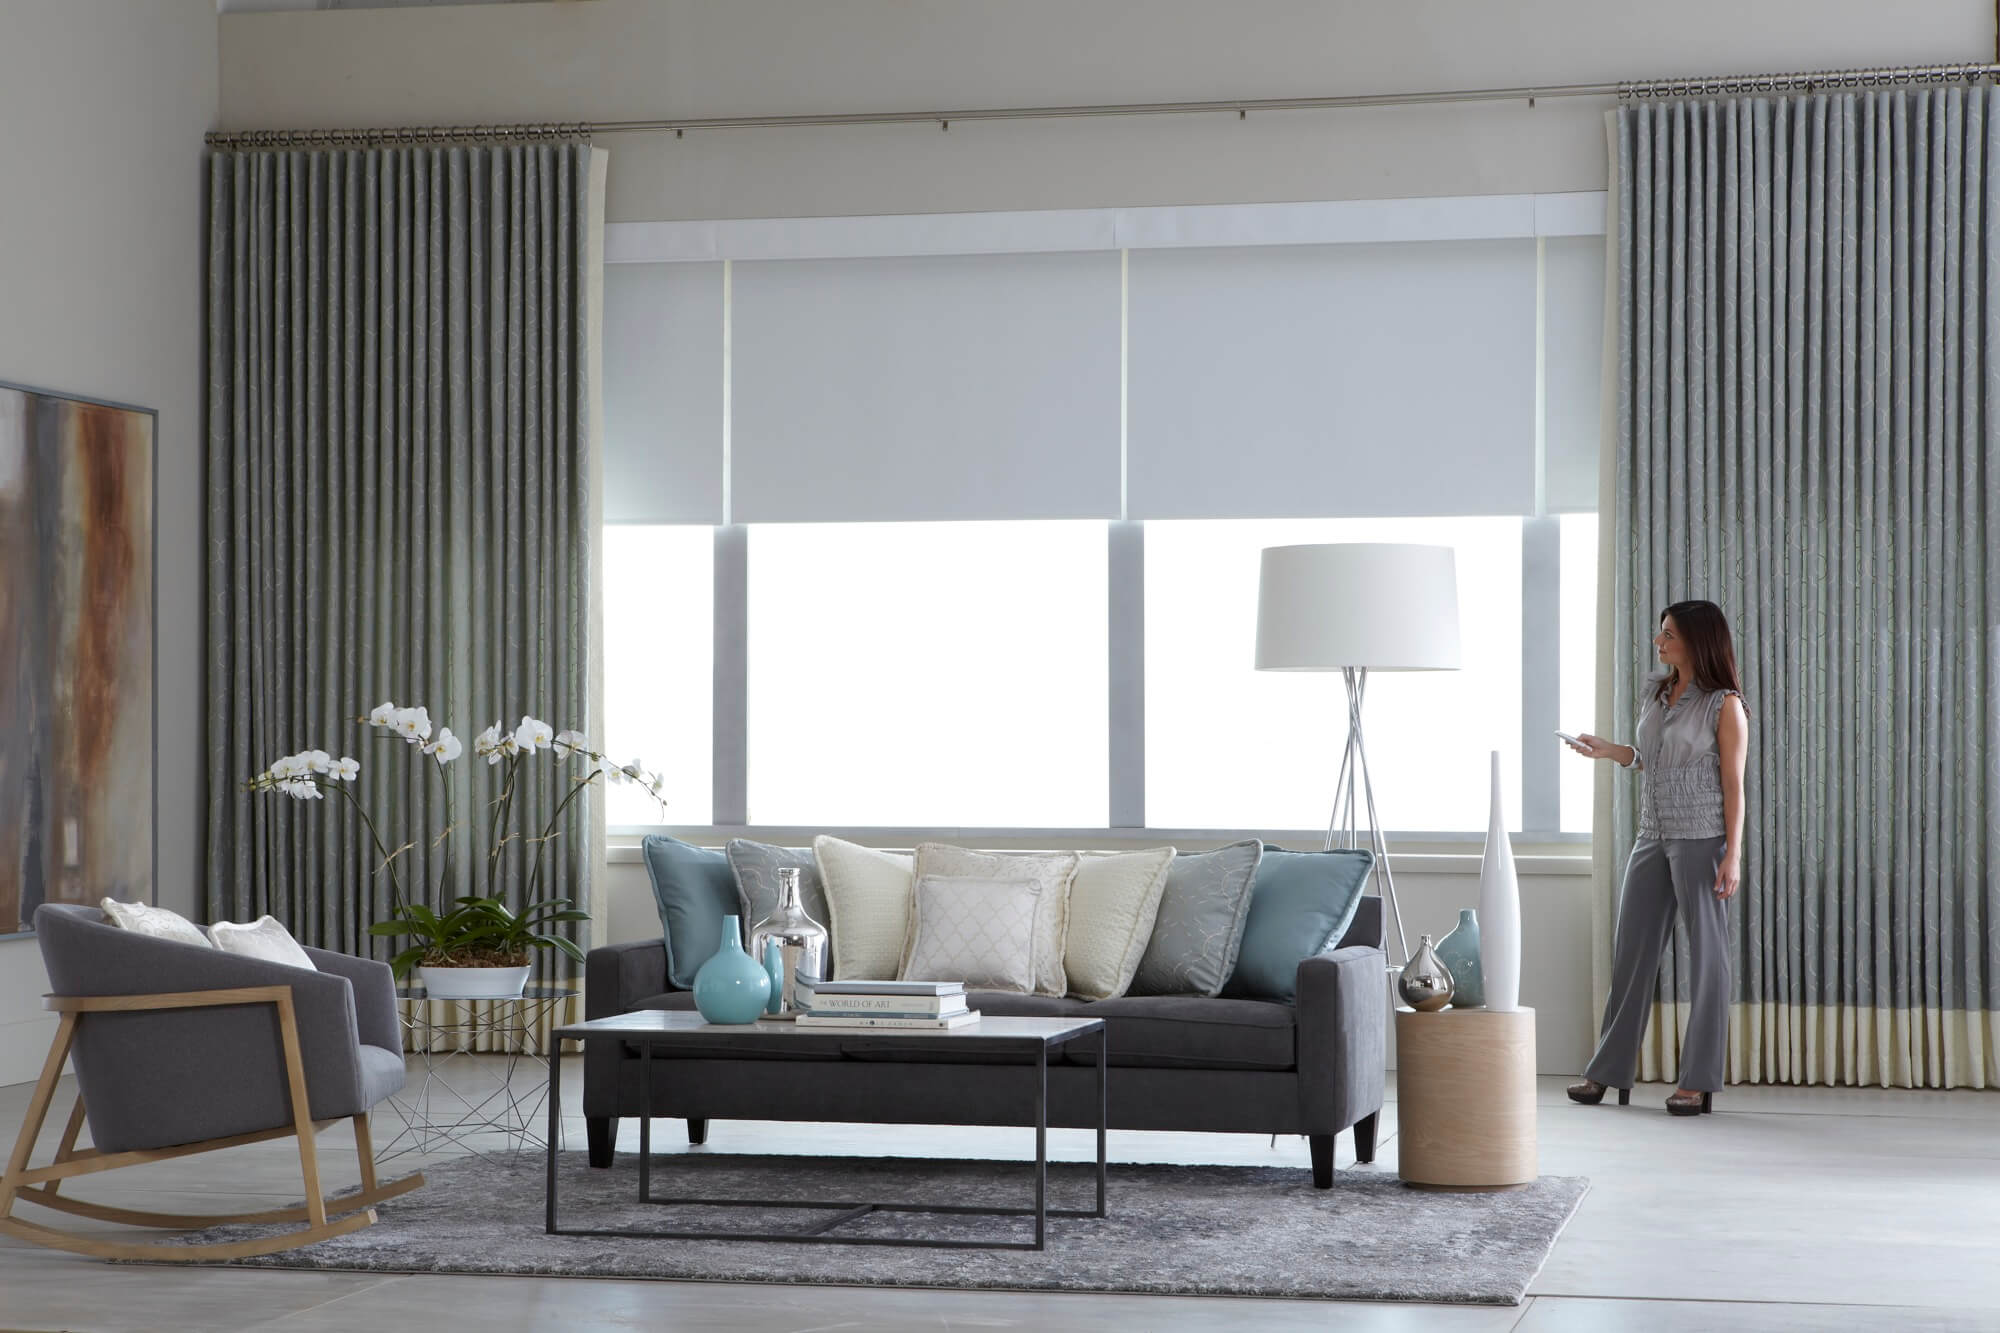 CurtainWala Benefits of Motorized Curtains Options and How They Work!